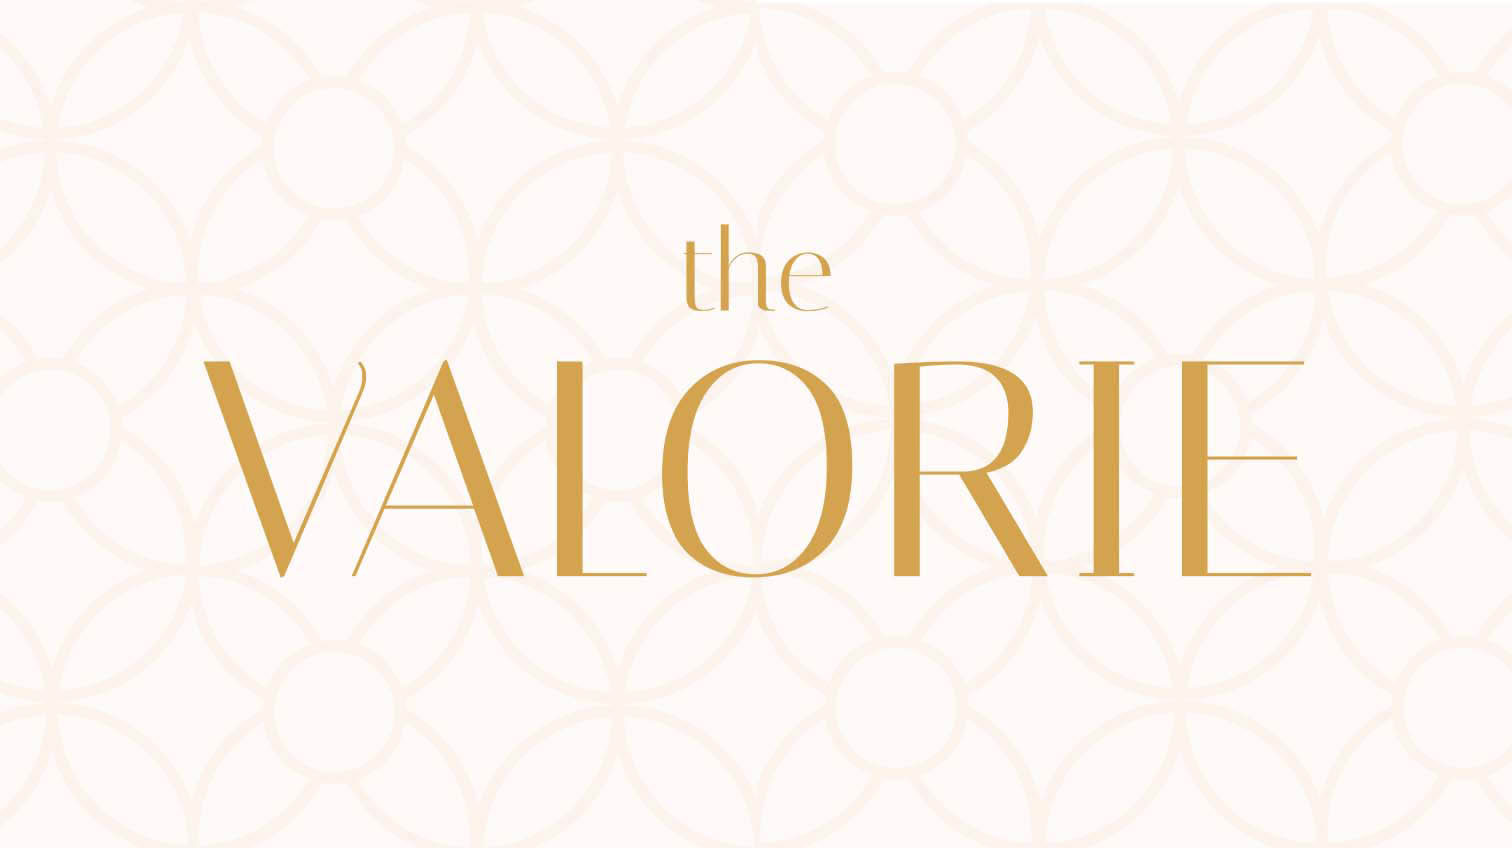 The Valorie logo – by White Canvas Design